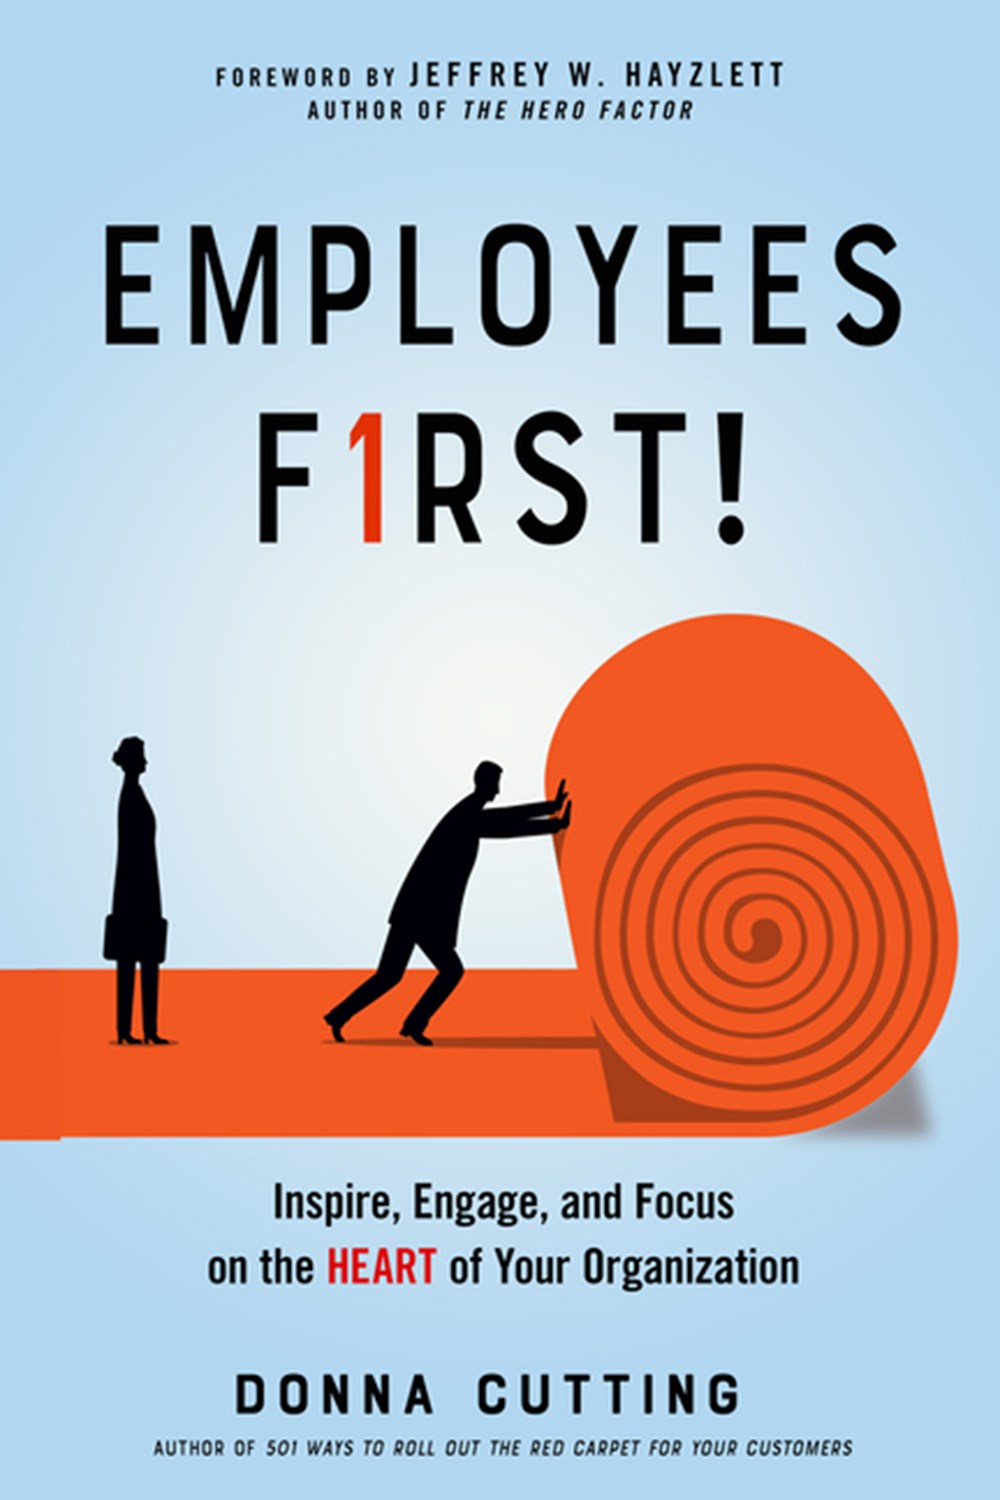 Employees First! Inspire, Engage, and Focus on the Heart of Your Organization